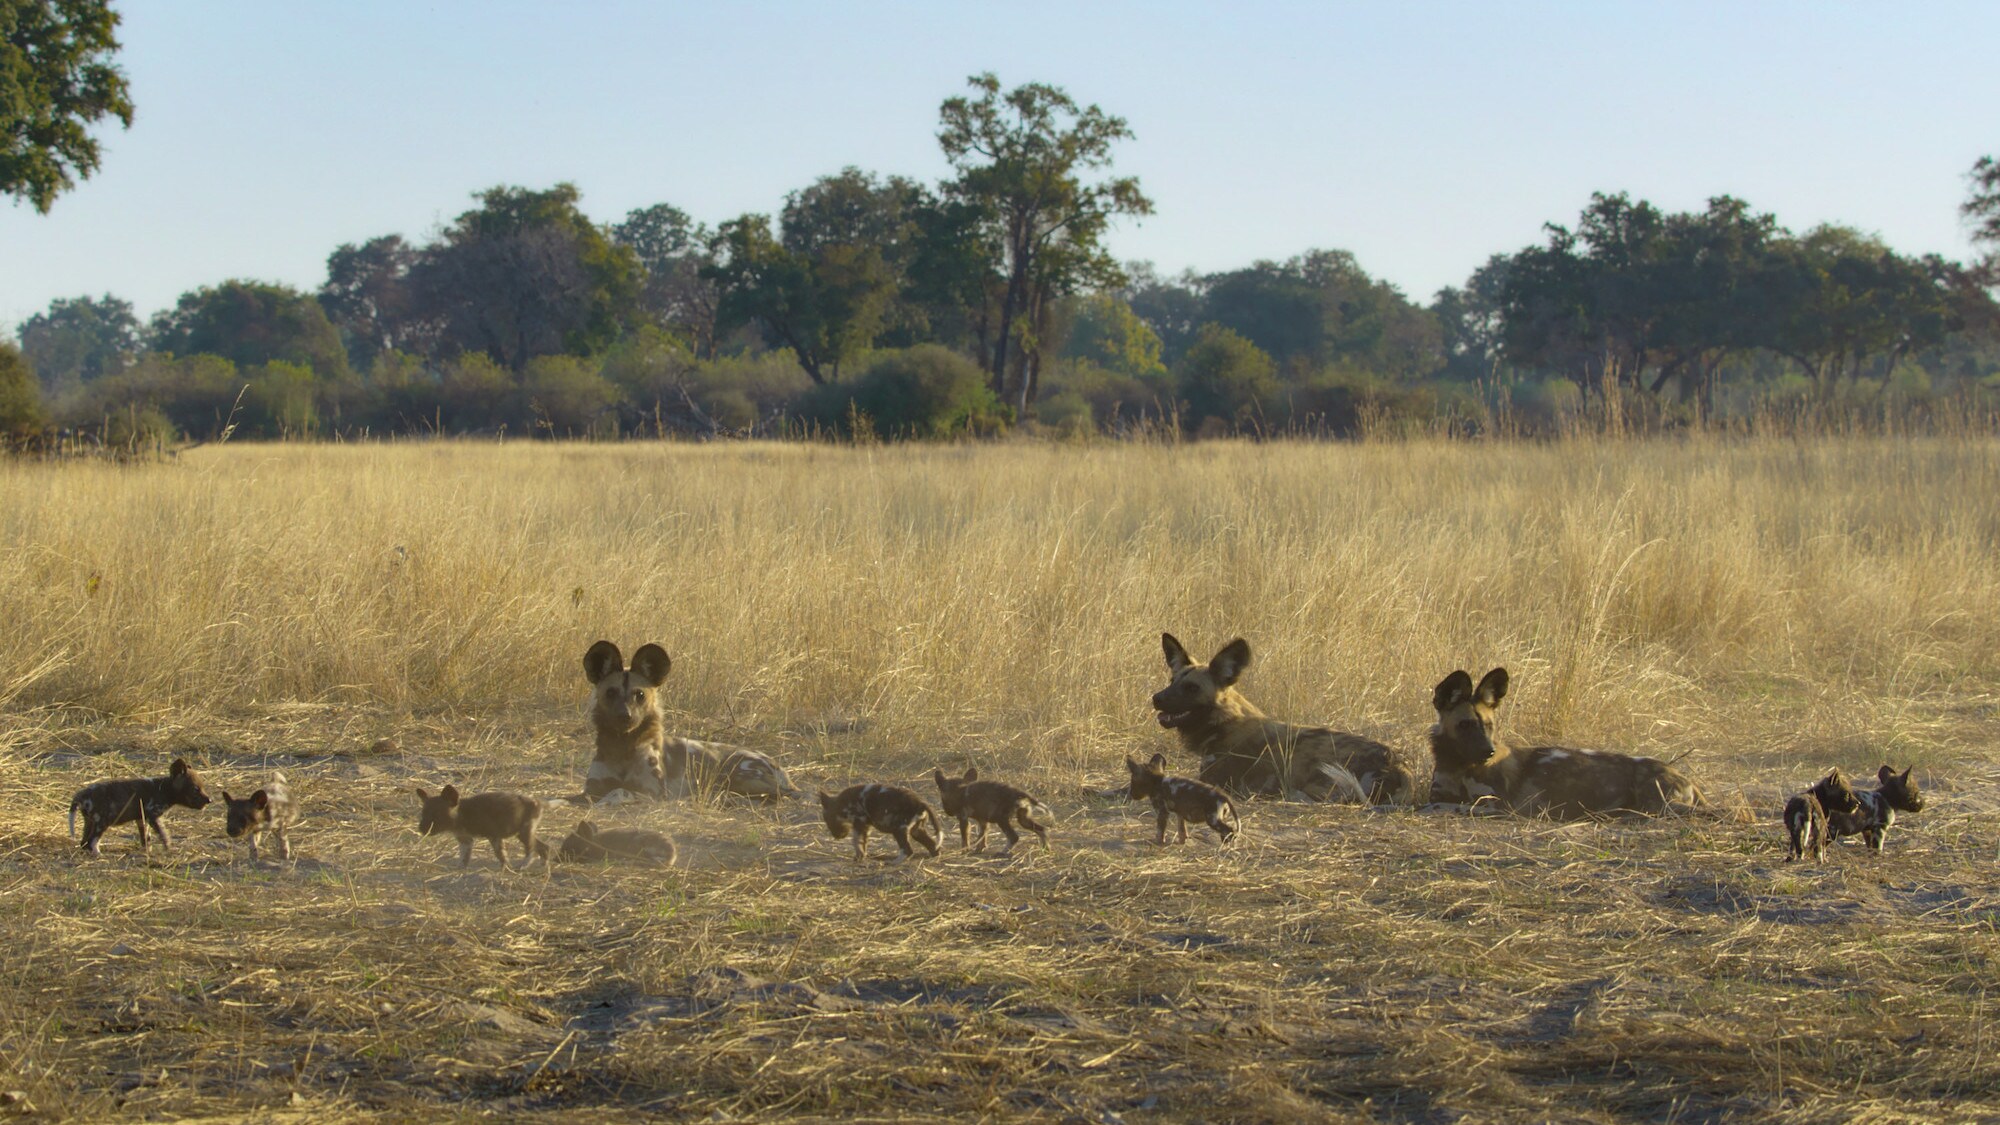 Adult Wild Dogs lying in the grass surrounded by a litter of playing pups. (National Geographic for Disney+/Bertie Gregory)